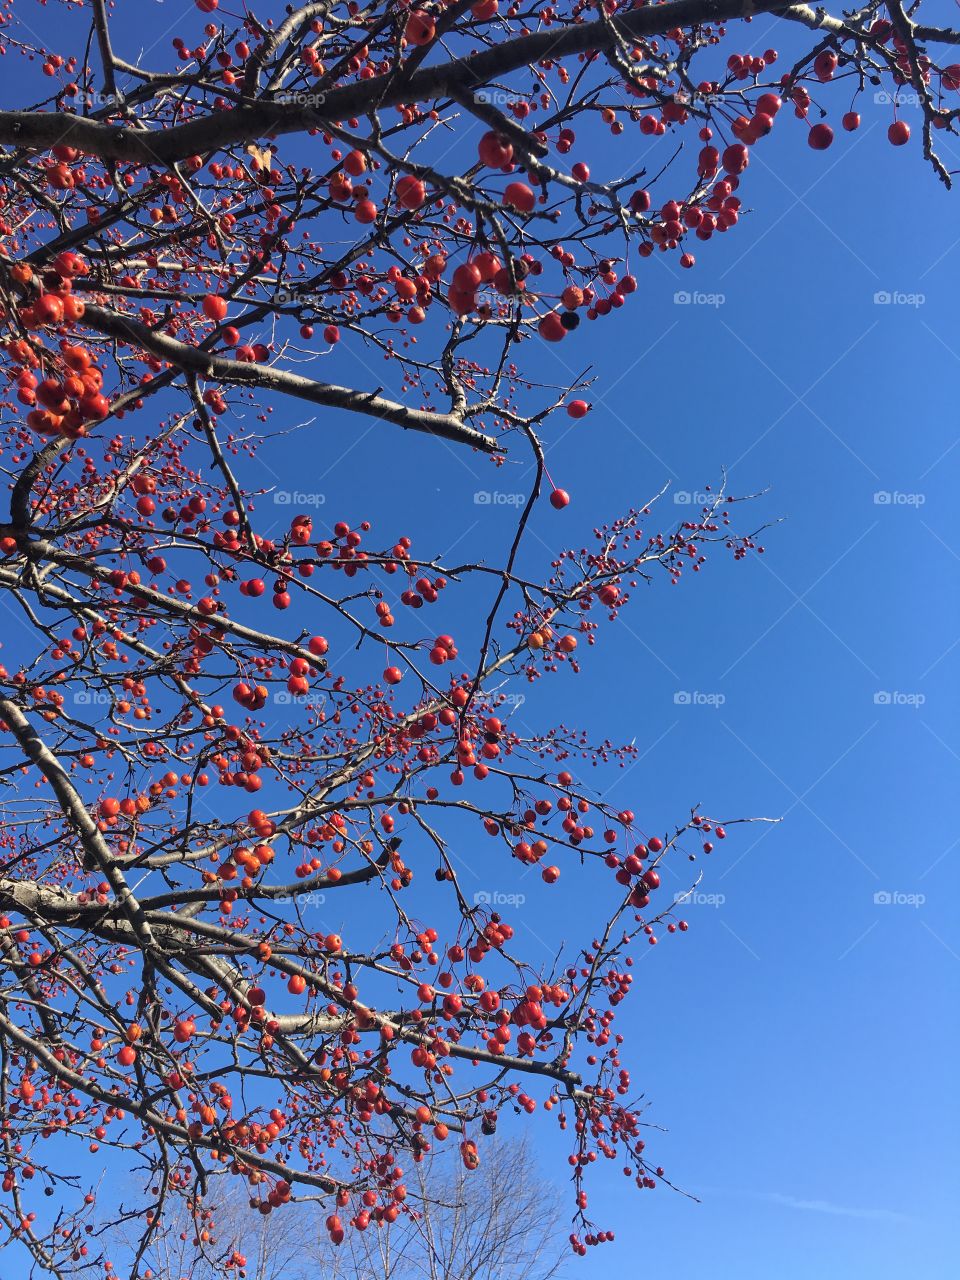 Red berries against a blue sky 